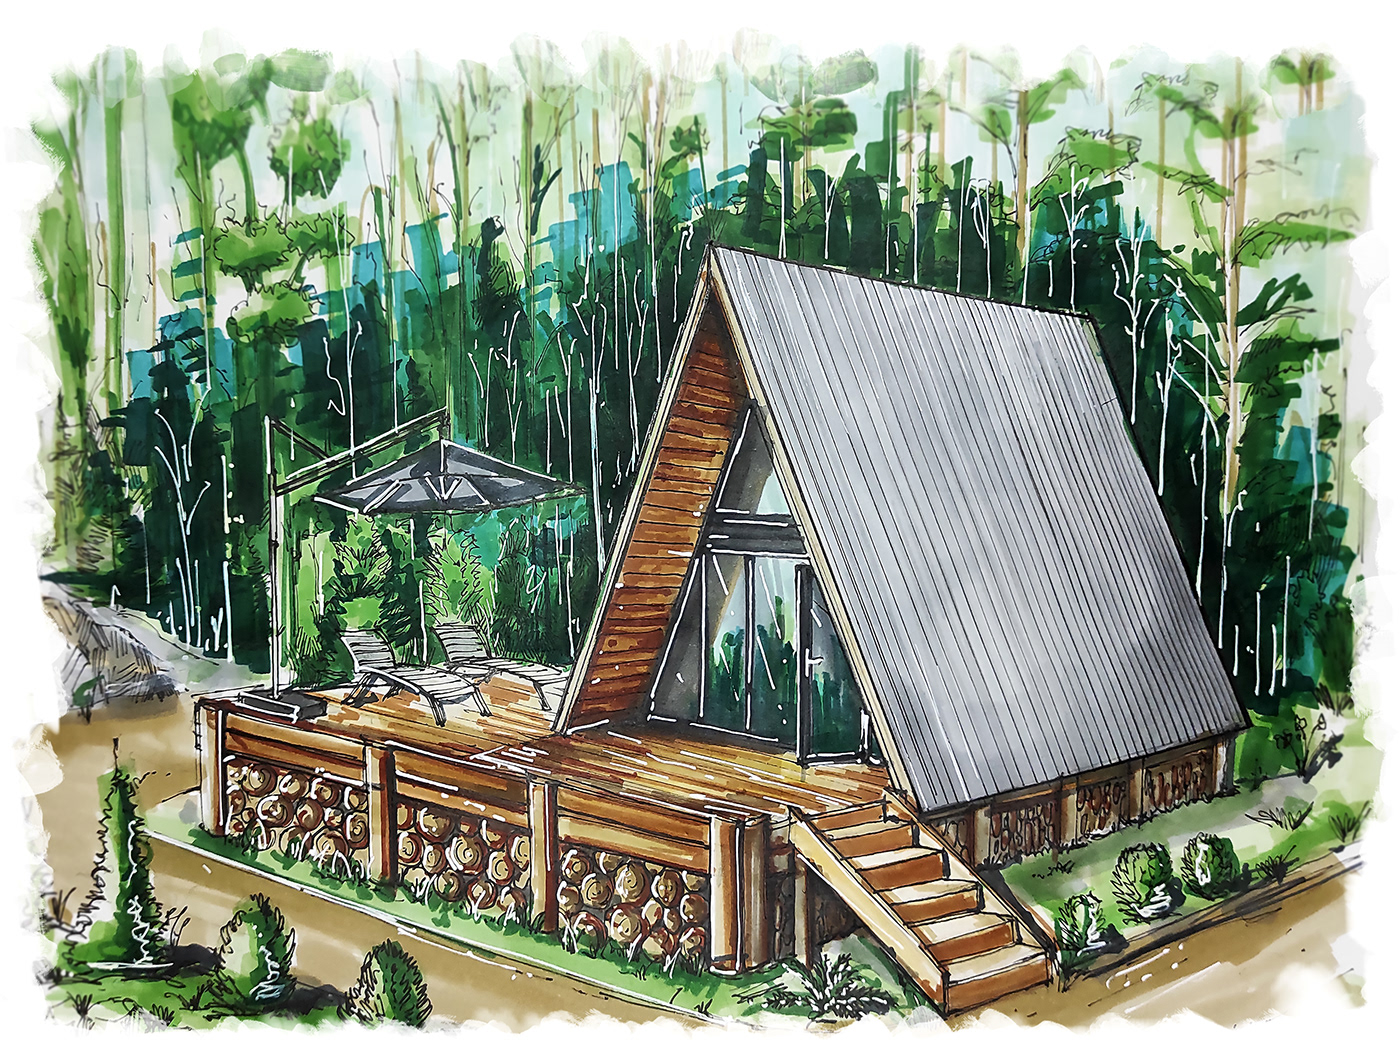 Sketch A of a house that was built in the forest.